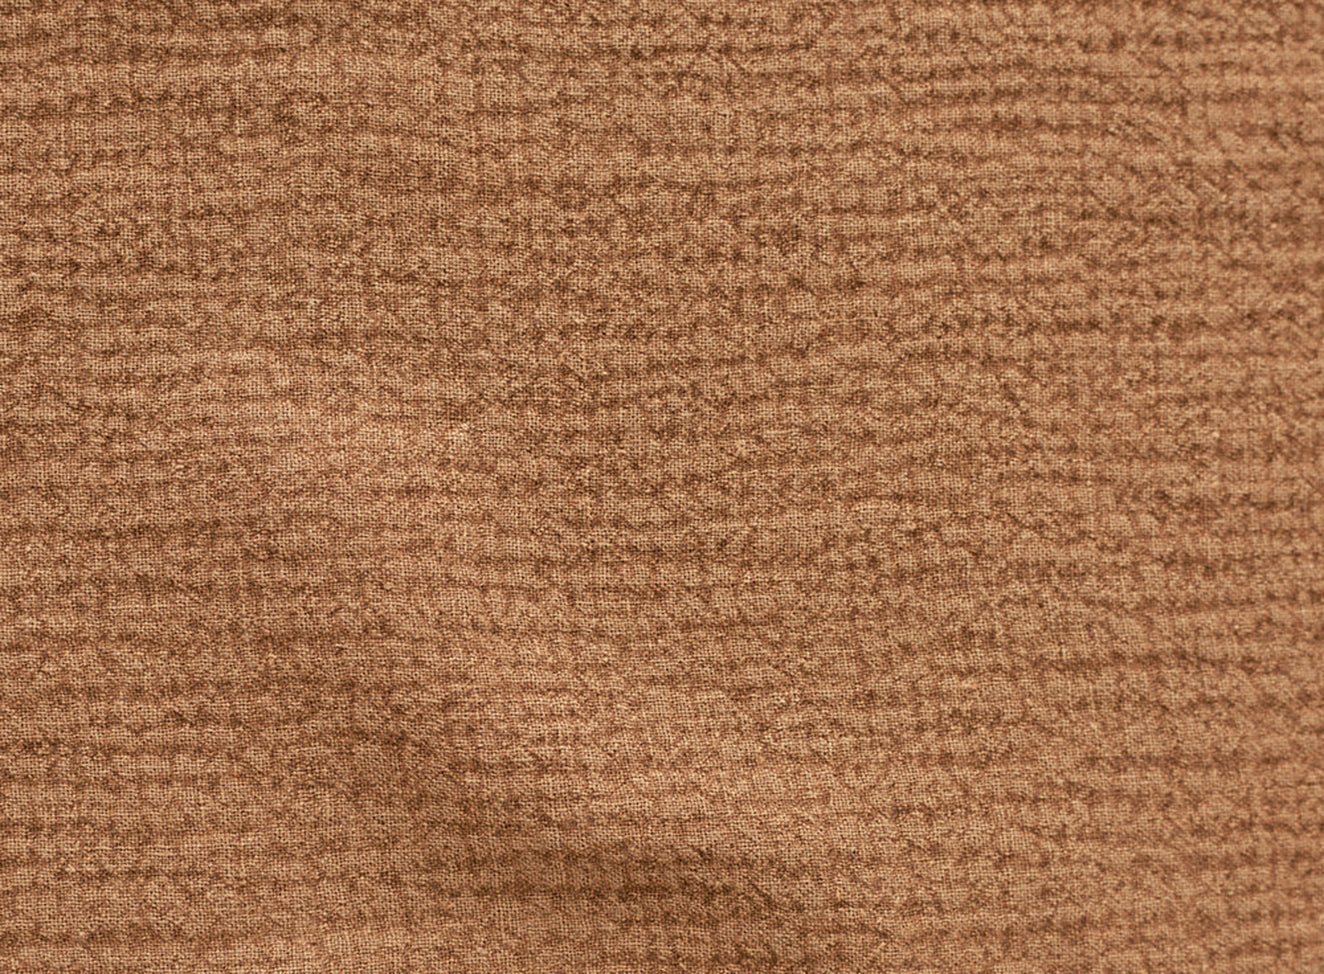 Swatch in Sweet Potato, a copper brown Washed Cotton Linen